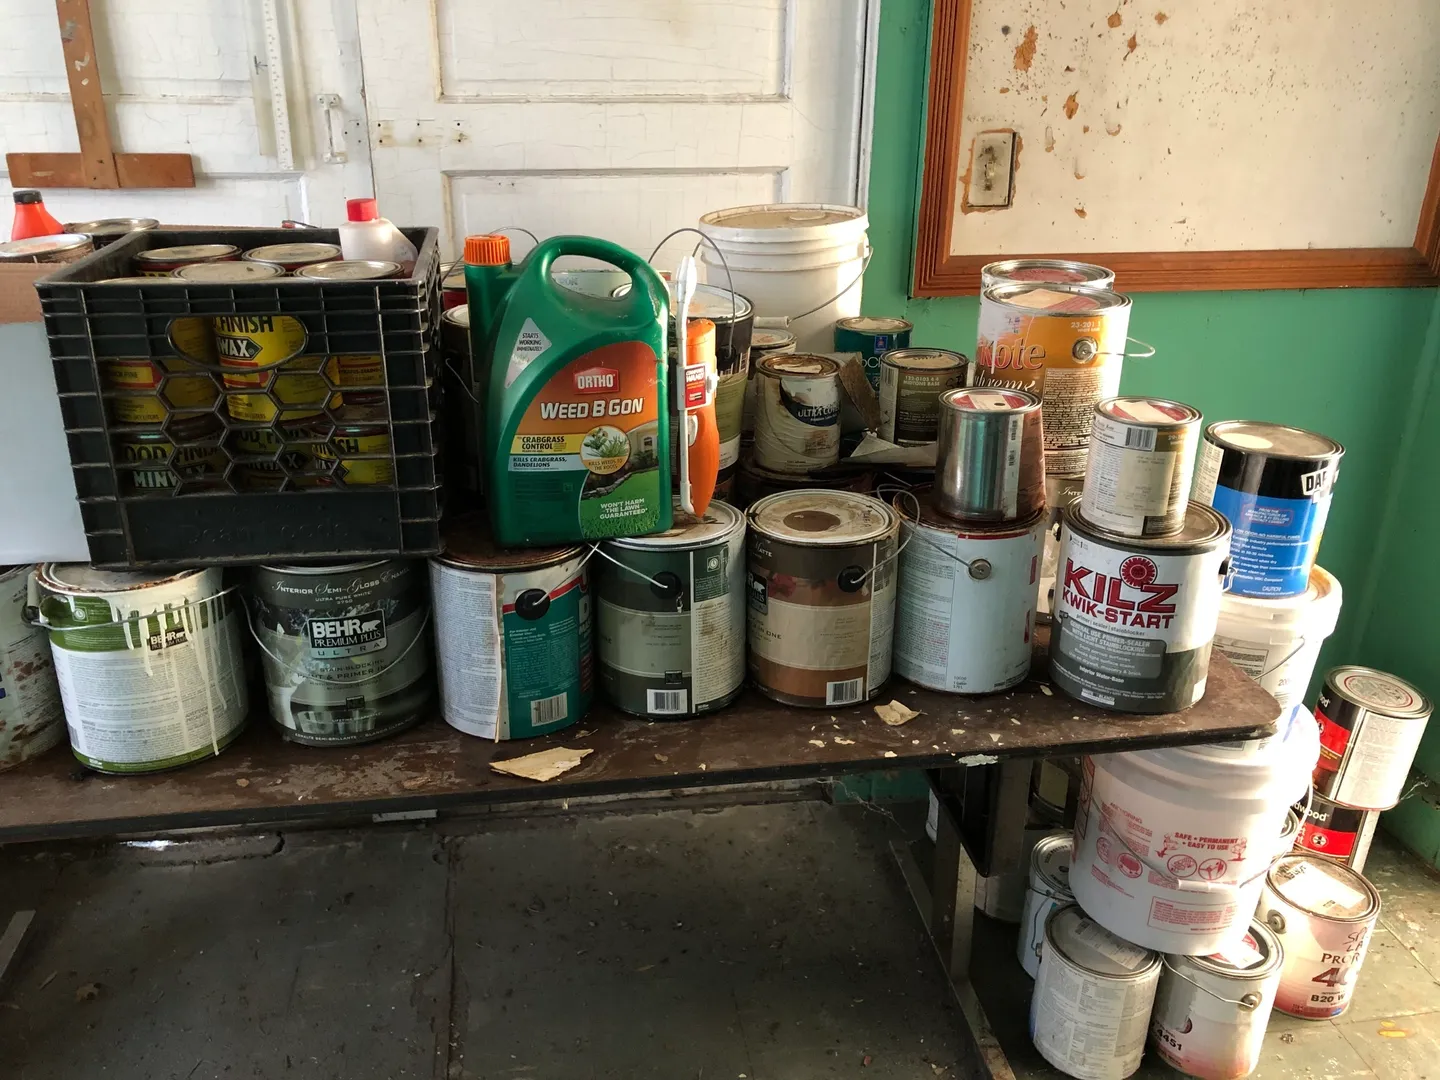 A wooden table full of paint cans and other containers.